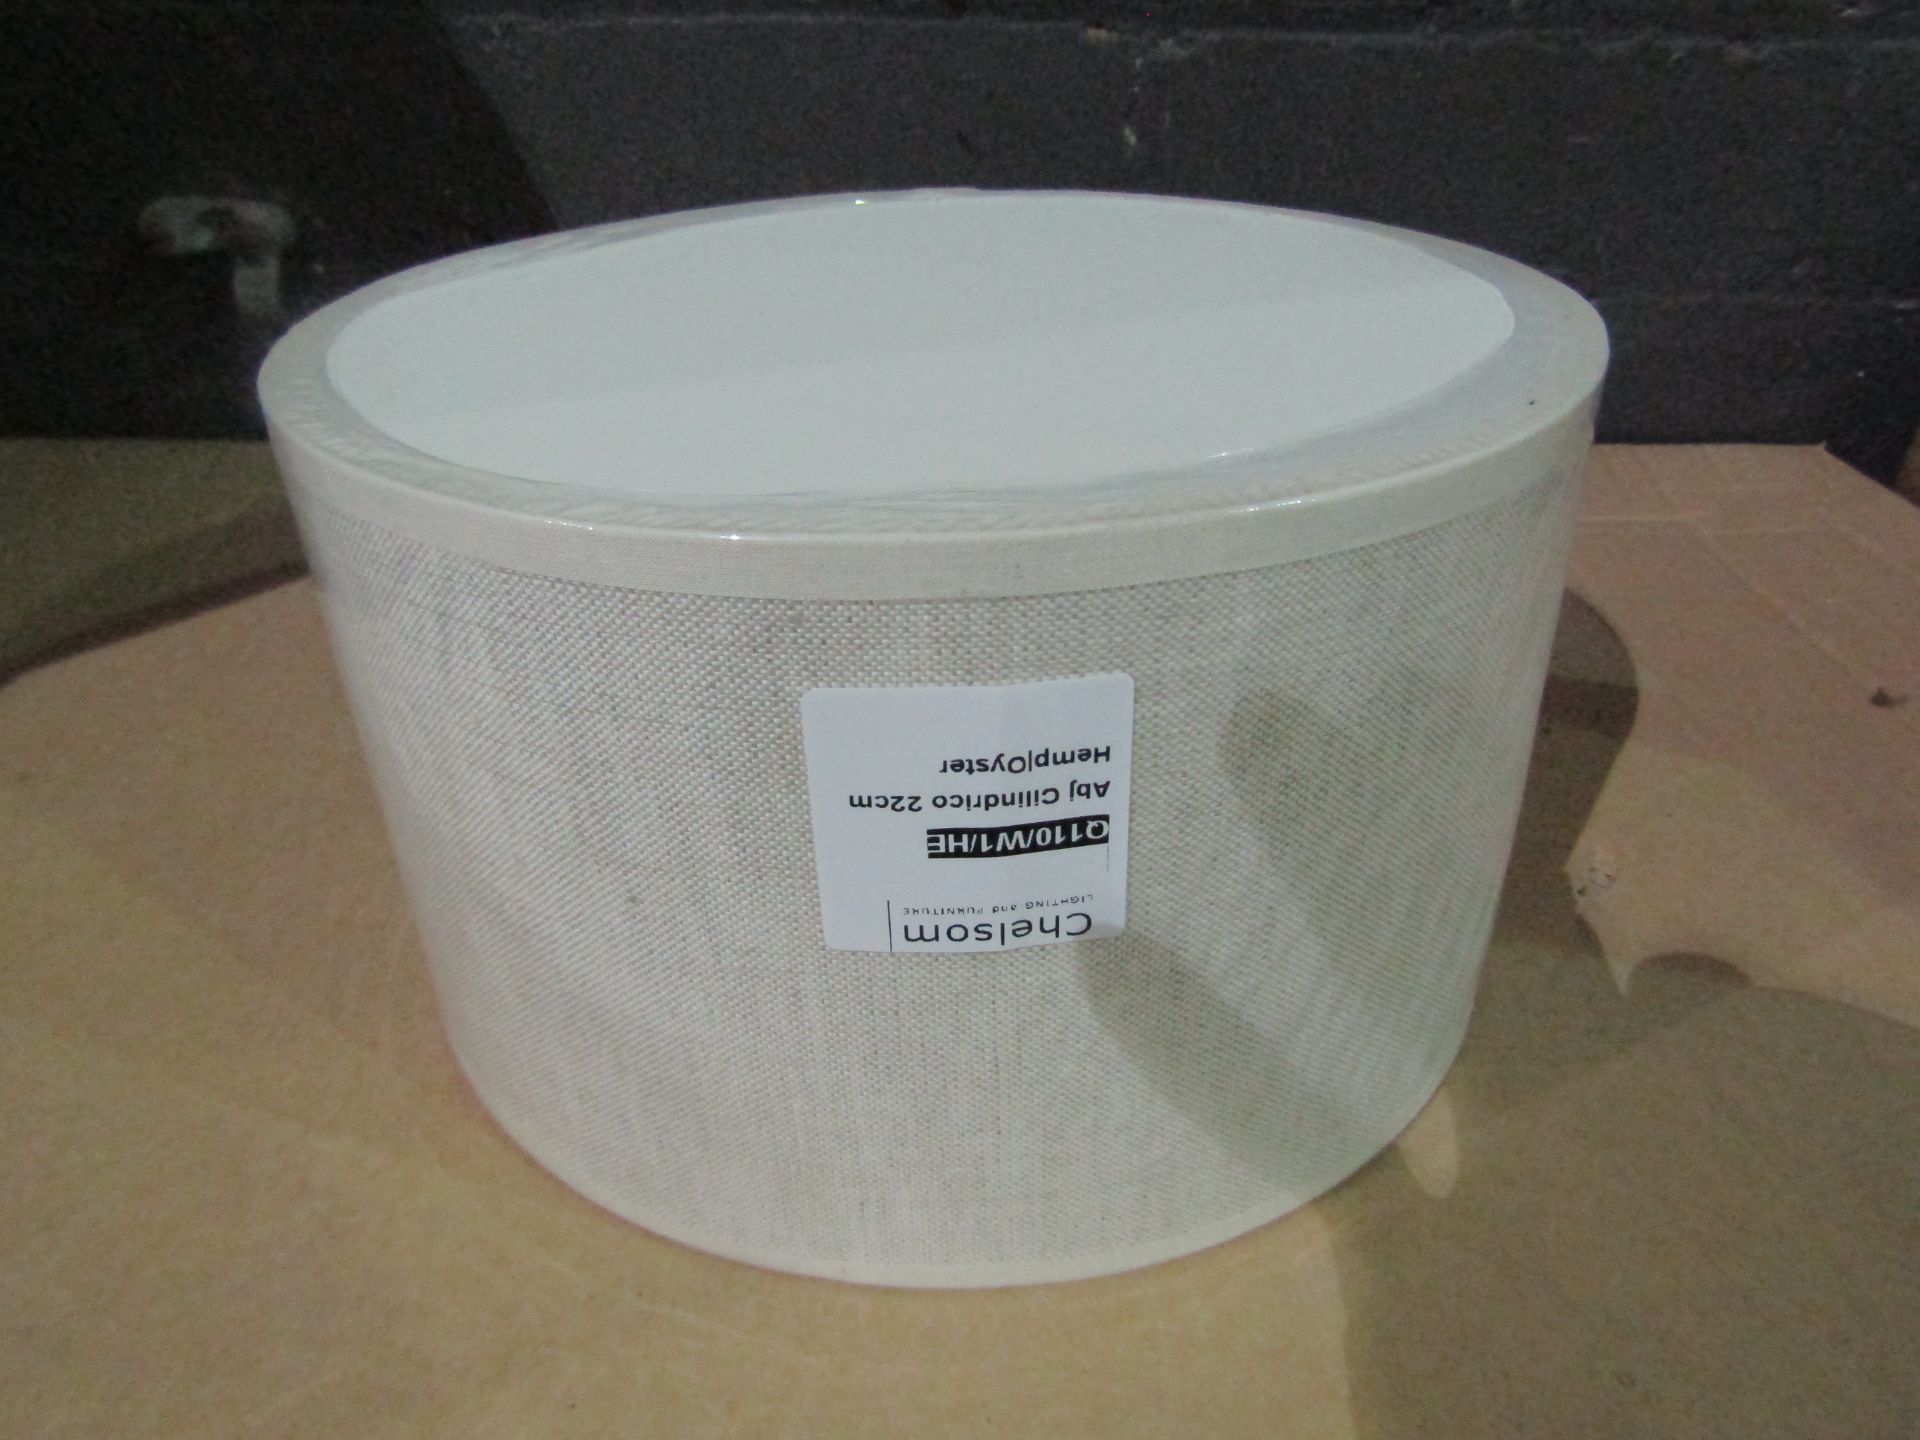 19x Chelsom Small Hemp/Oyster 22cm Shade For CC/110/WI/BB/EBR - New & Packaged - Model: Q110/WI/HE